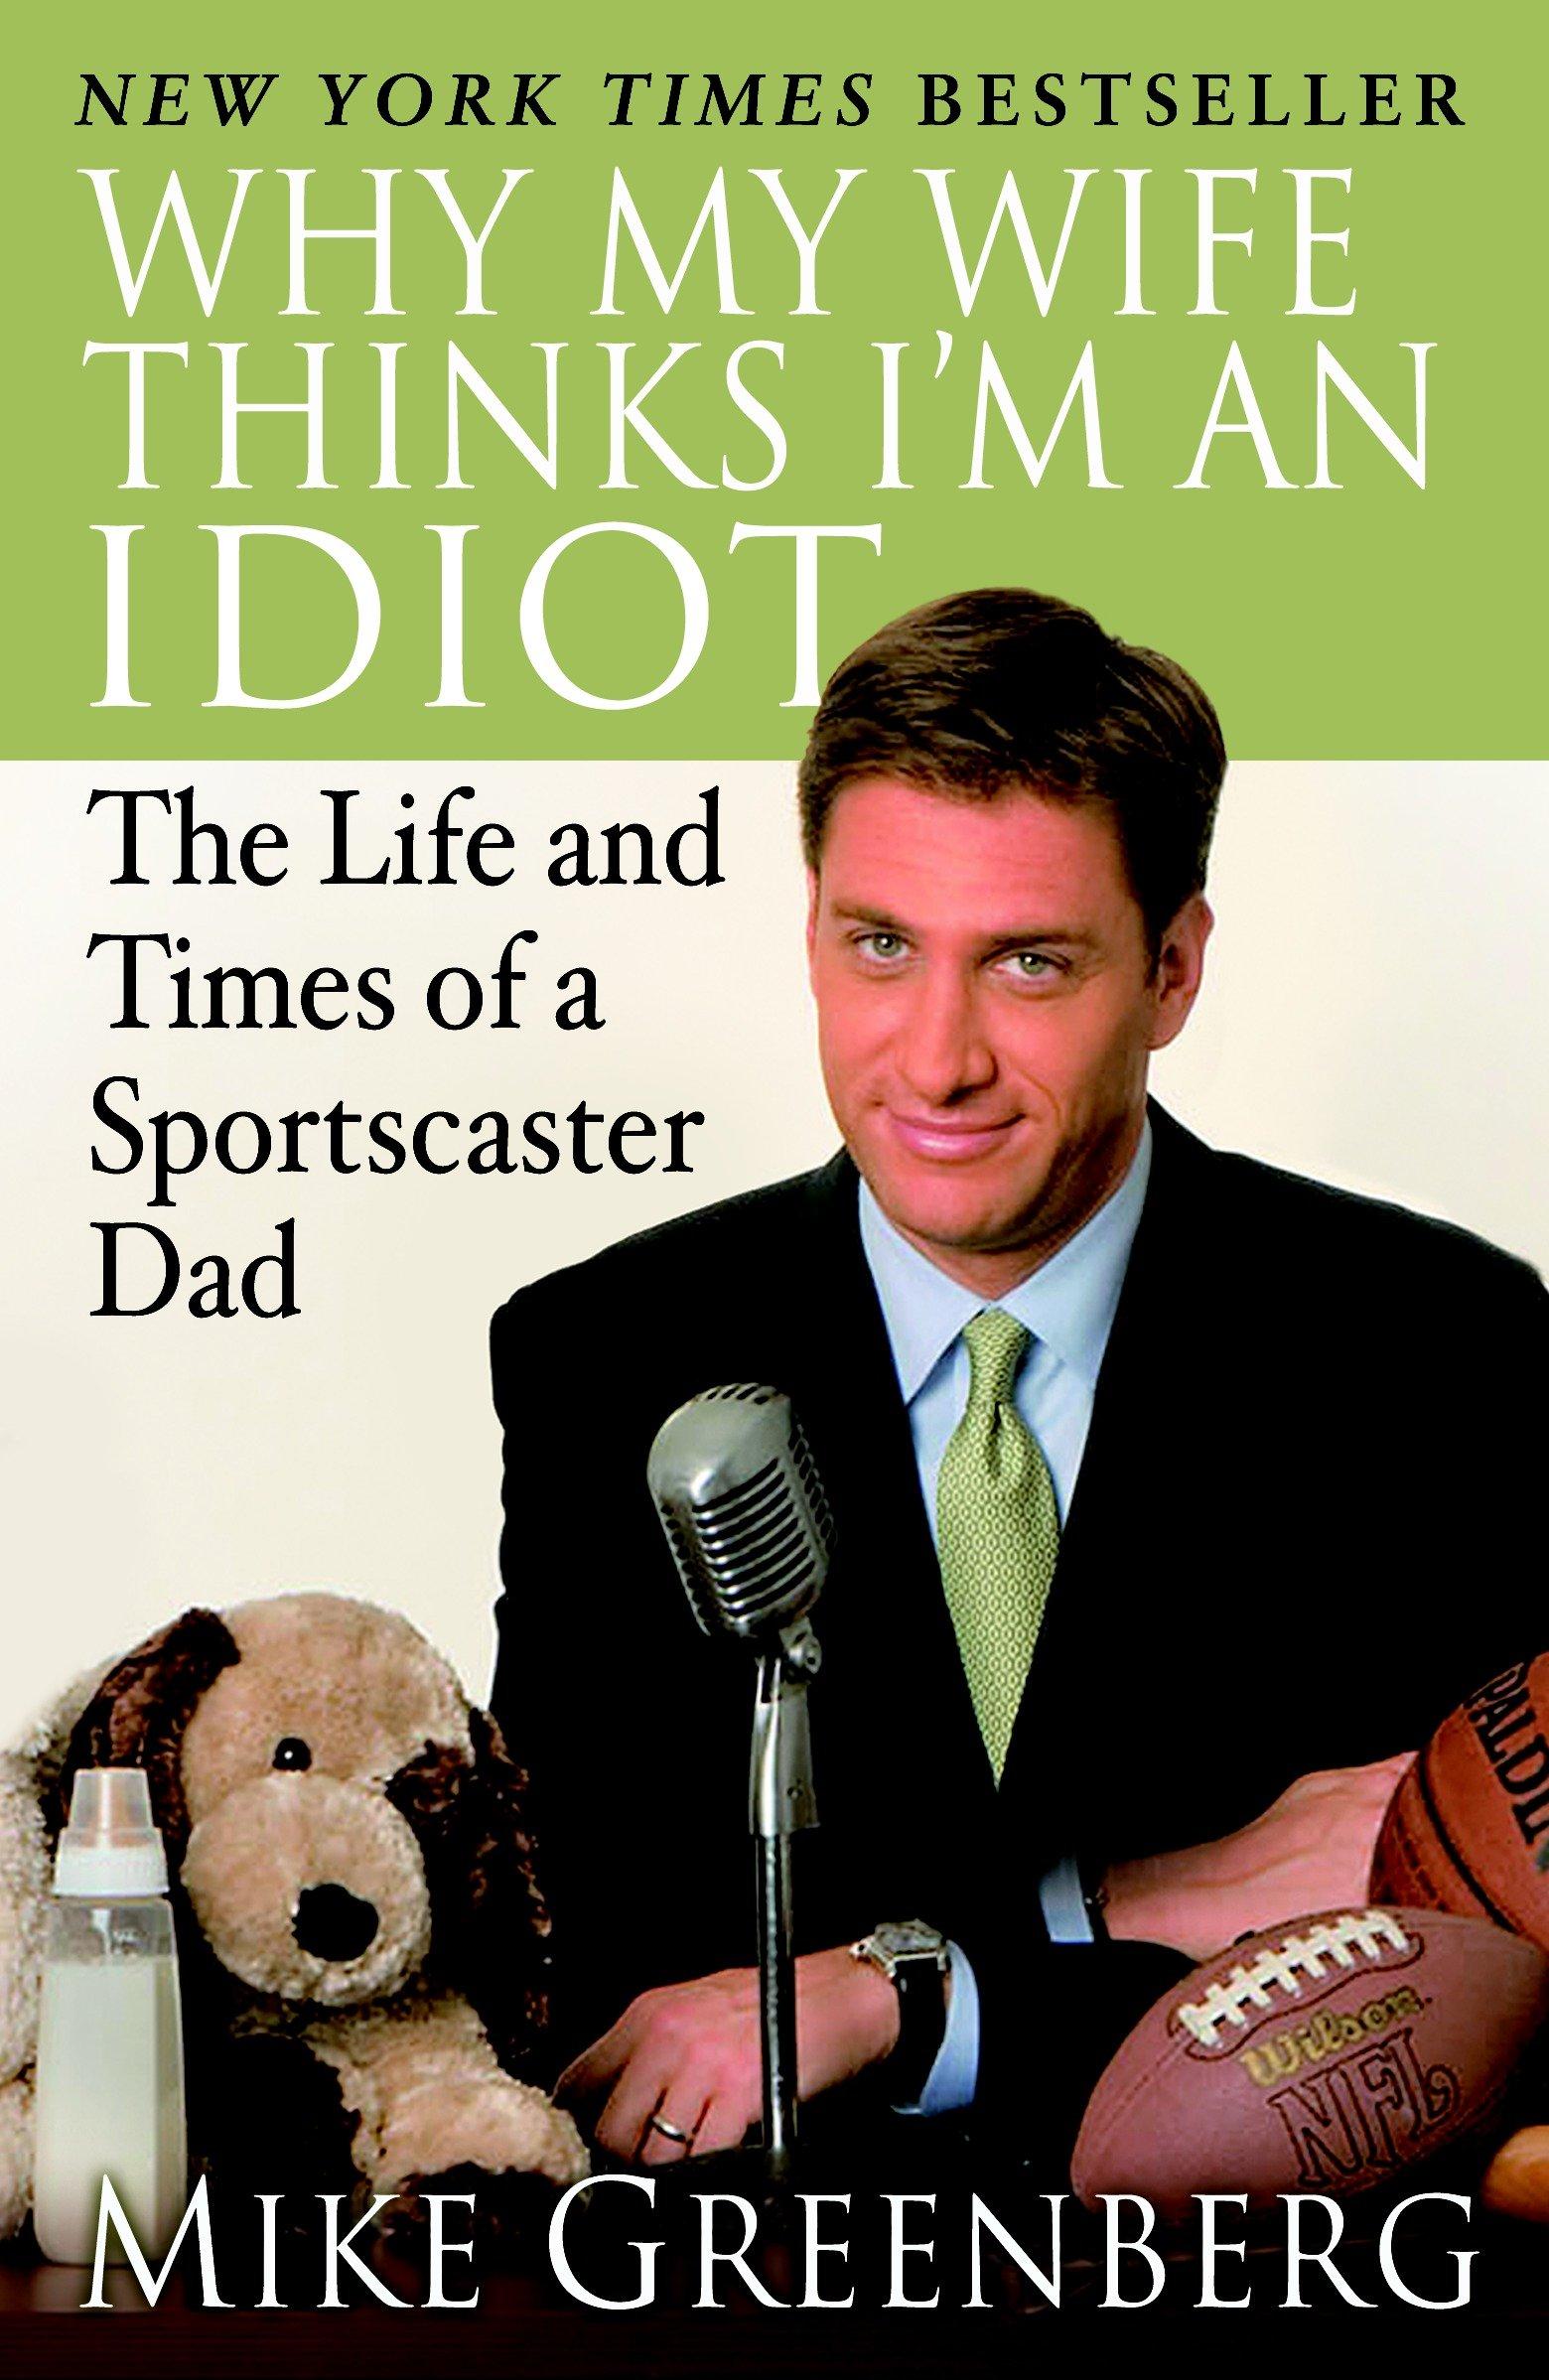 Why My Wife Thinks I'm an Idiot / The Life and Times of a Sportscaster Dad / Mike Greenberg / Taschenbuch / Einband - flex.(Paperback) / Englisch / 2007 / VILLARD / EAN 9780812974805 - Greenberg, Mike